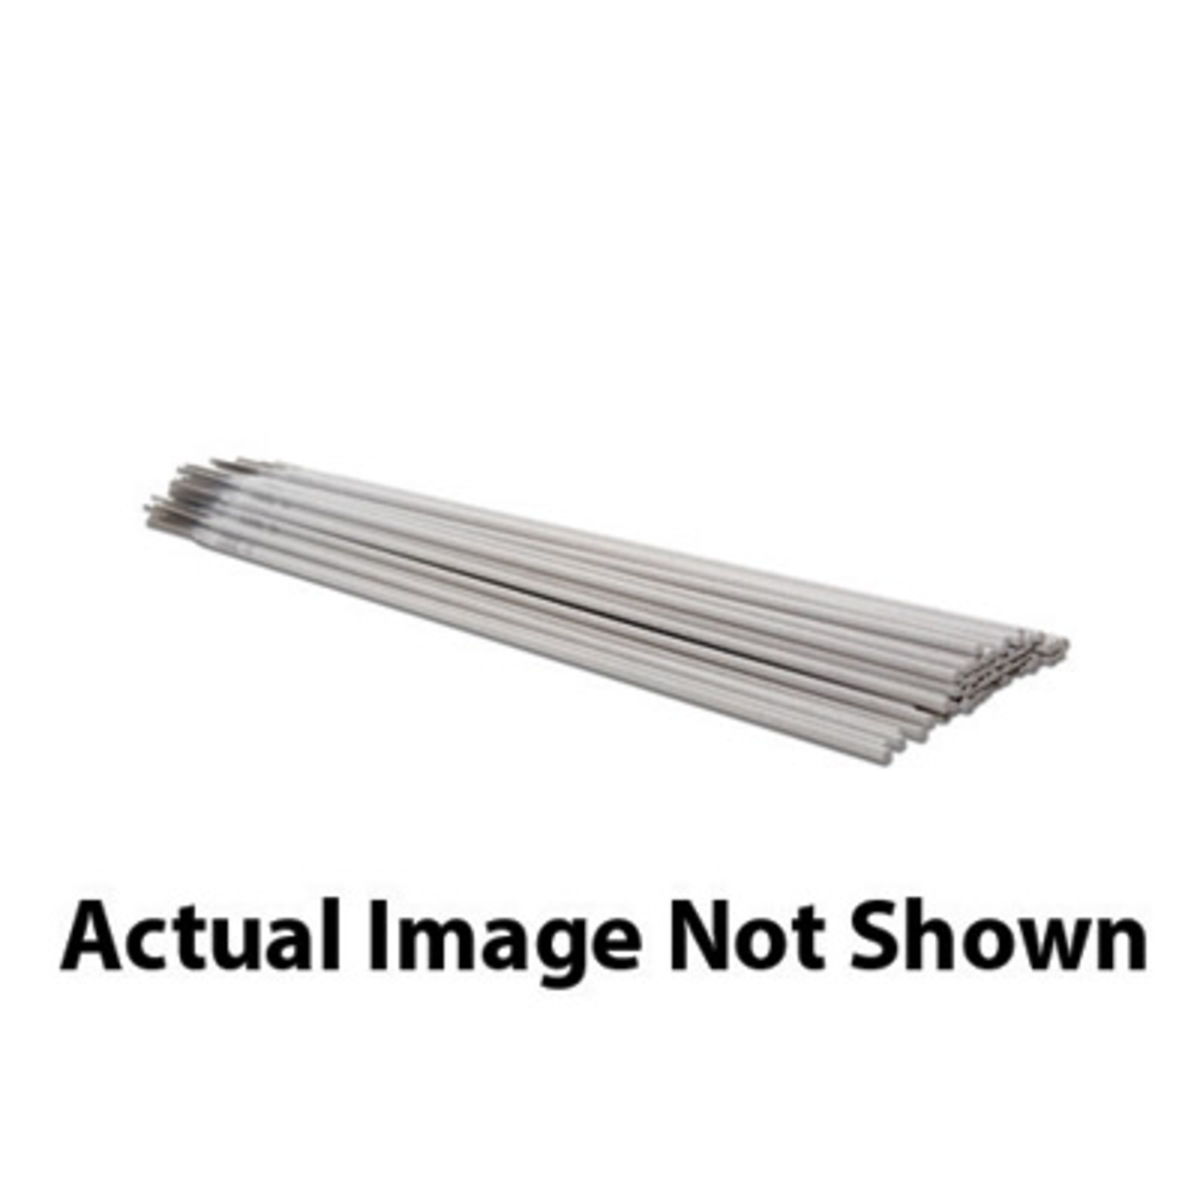 E7018 3/32 dia 10 lbs NEW AC-DC welding electrodes Rods 12" 